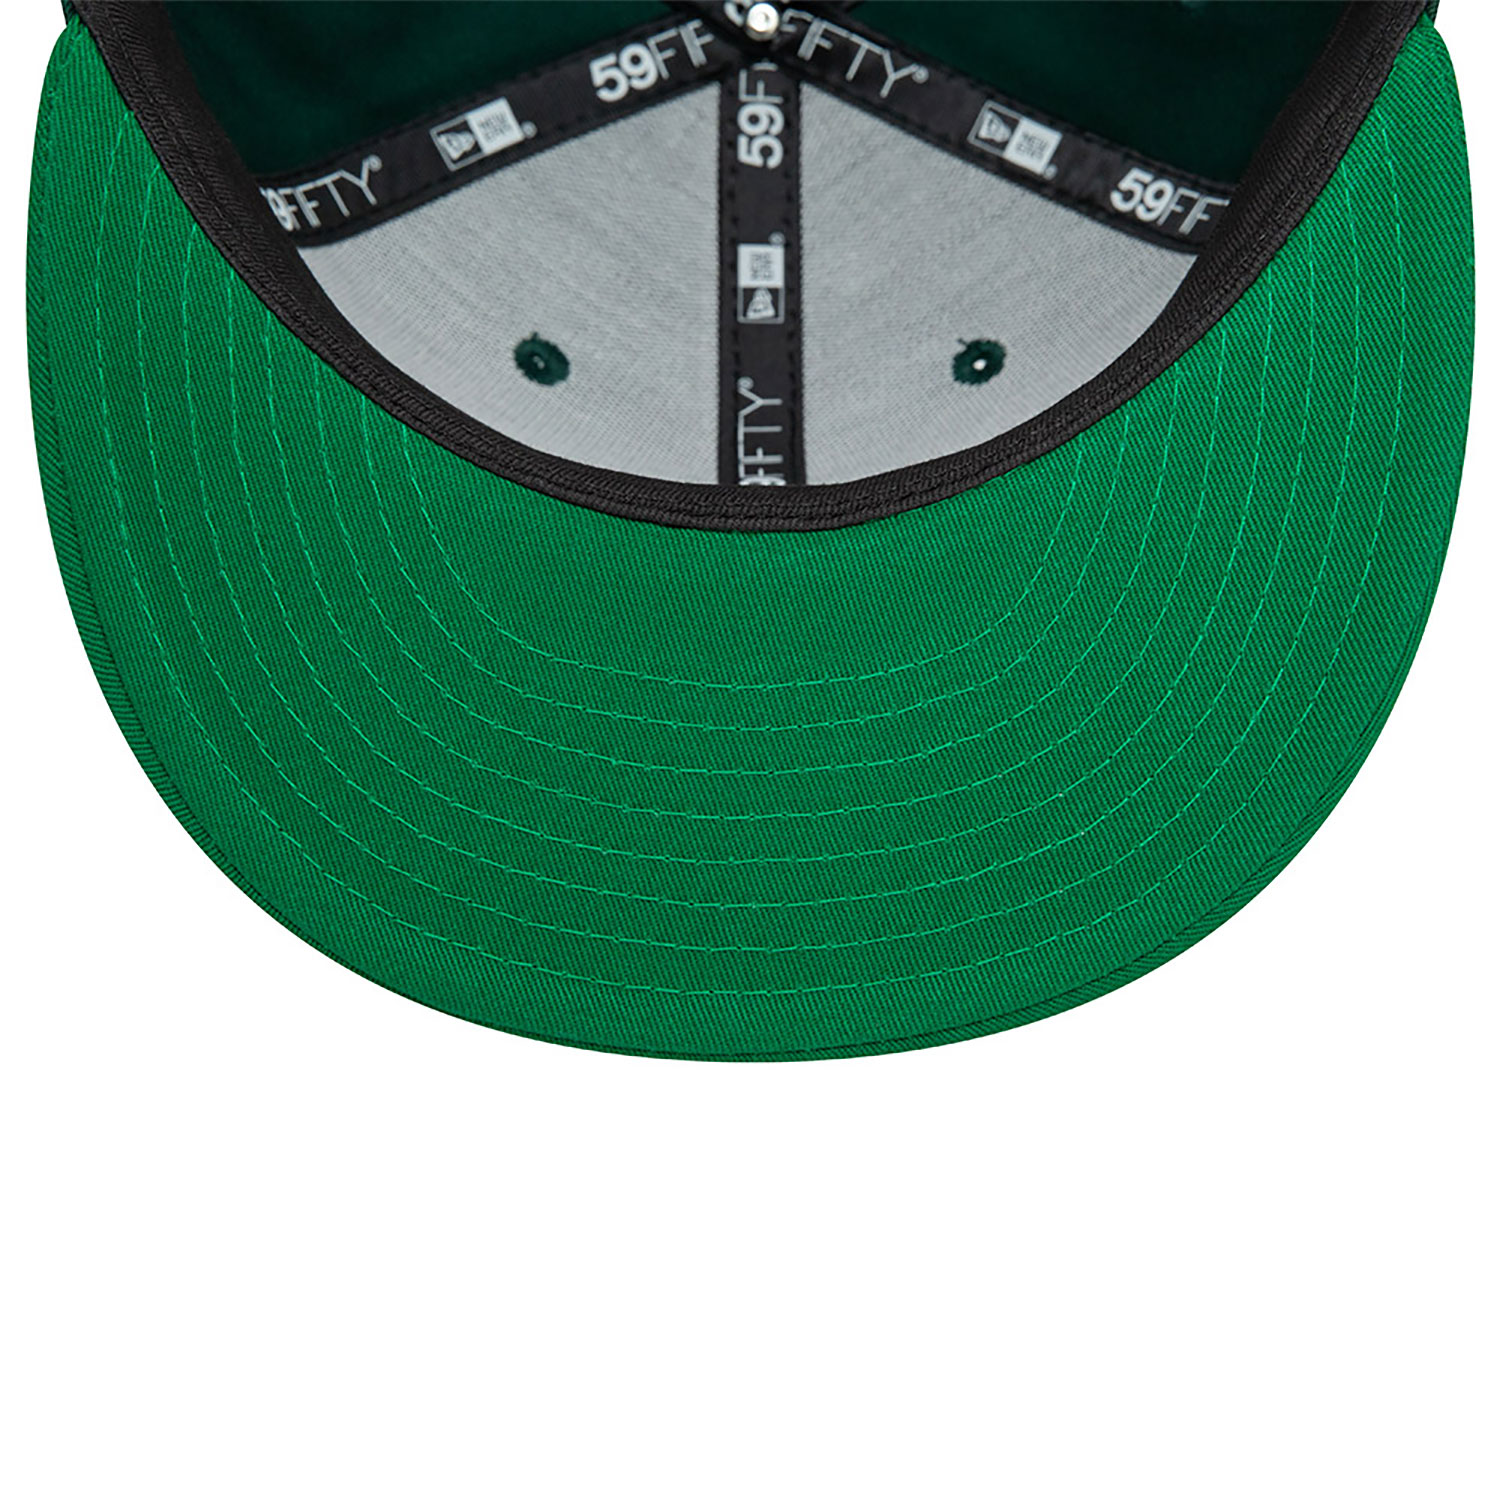 Oakland Athletics MLB Team Colour Green 59FIFTY Fitted Cap